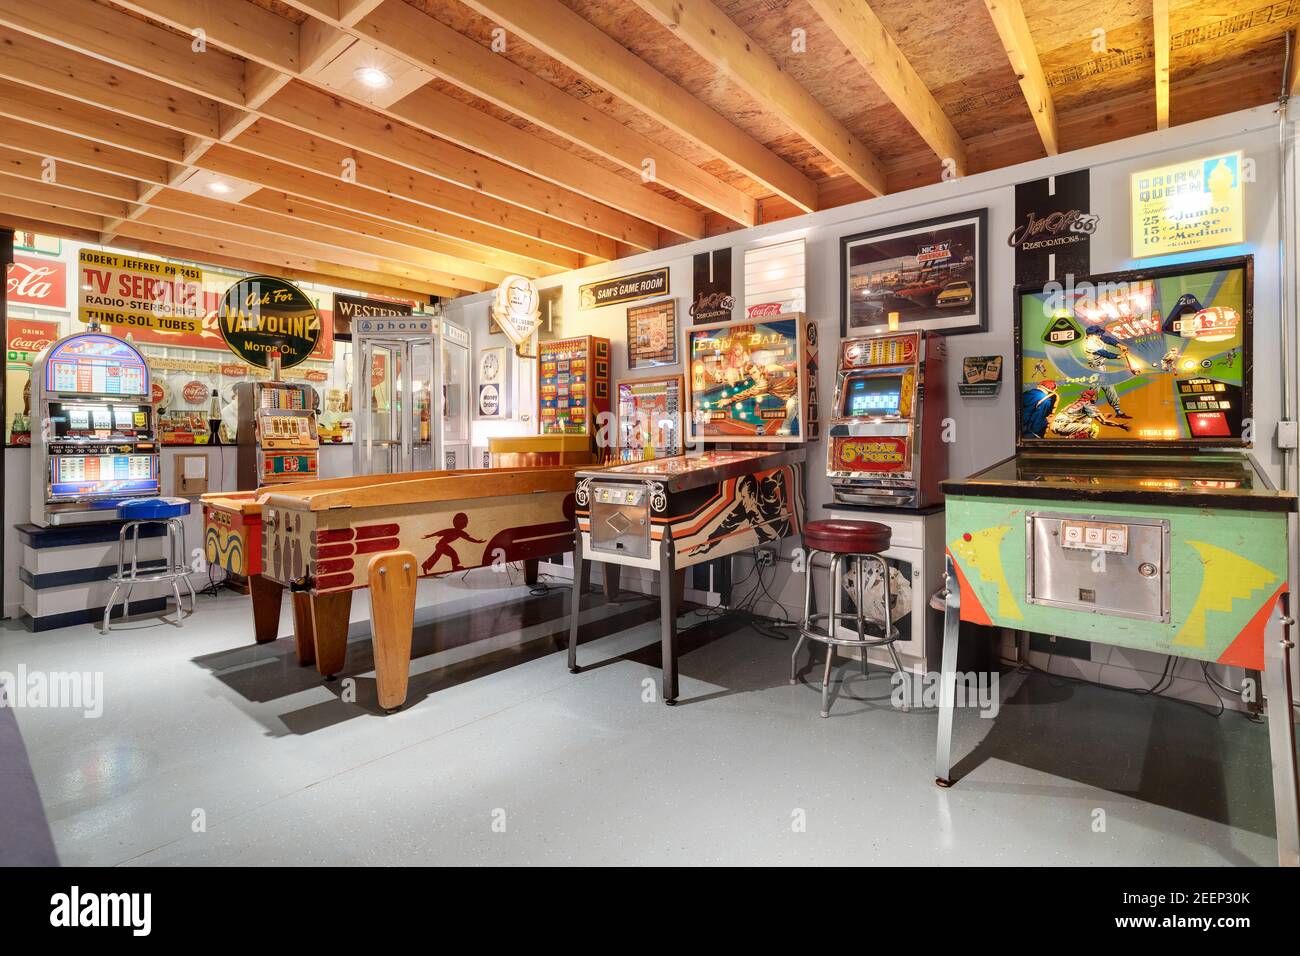 A basement arcade with various retro pinball machines and classic arcade games, old steel and tin company signs, and plenty of seating. Stock Photo